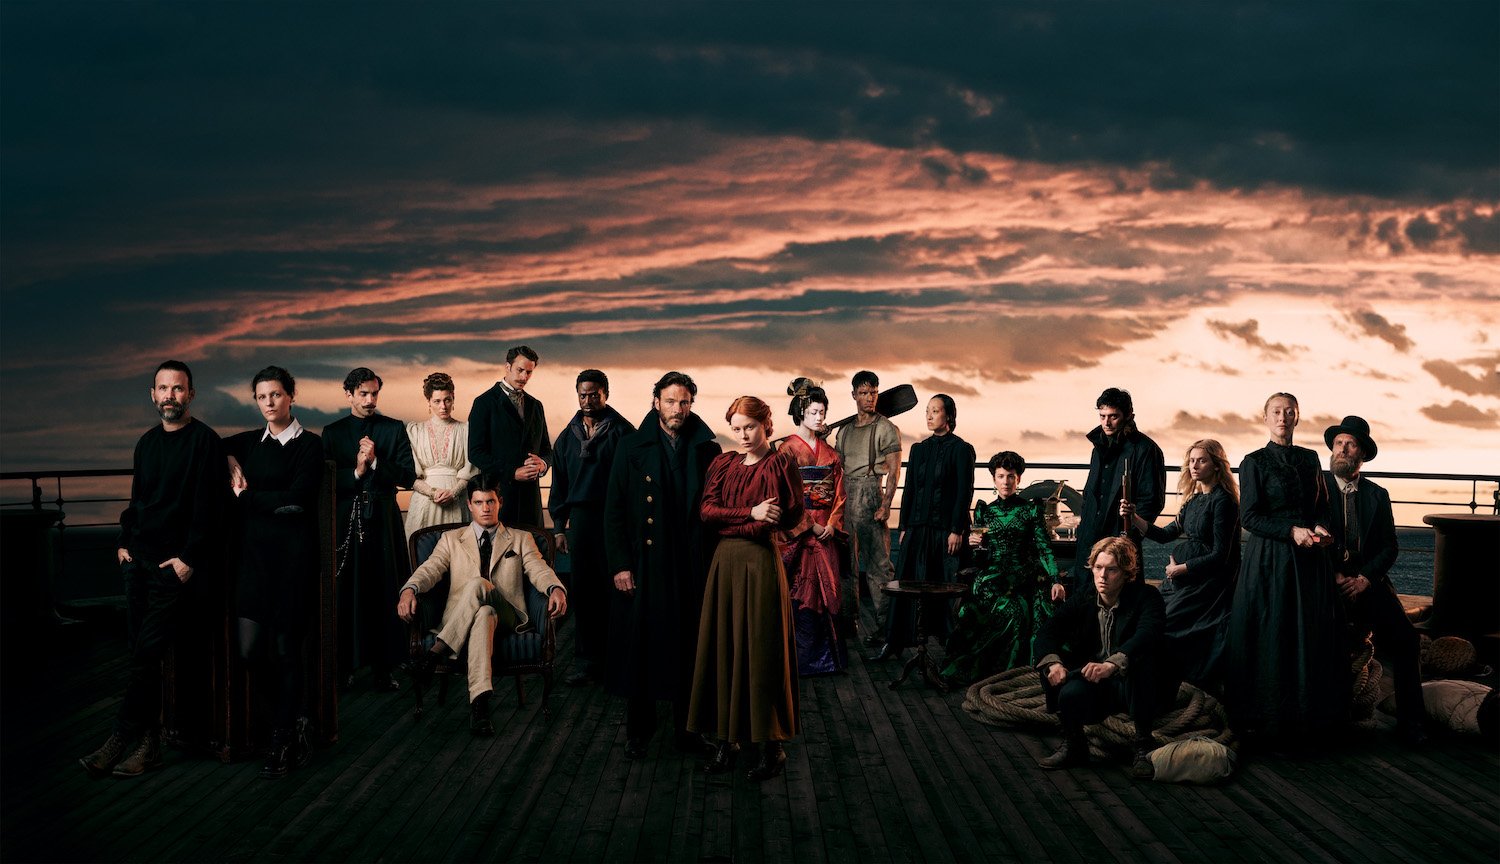 In '1899' the ships' names have ties to Greek mythology. In this production still, the entire cast stands on the deck of one of the ships while the sun sets behind them.